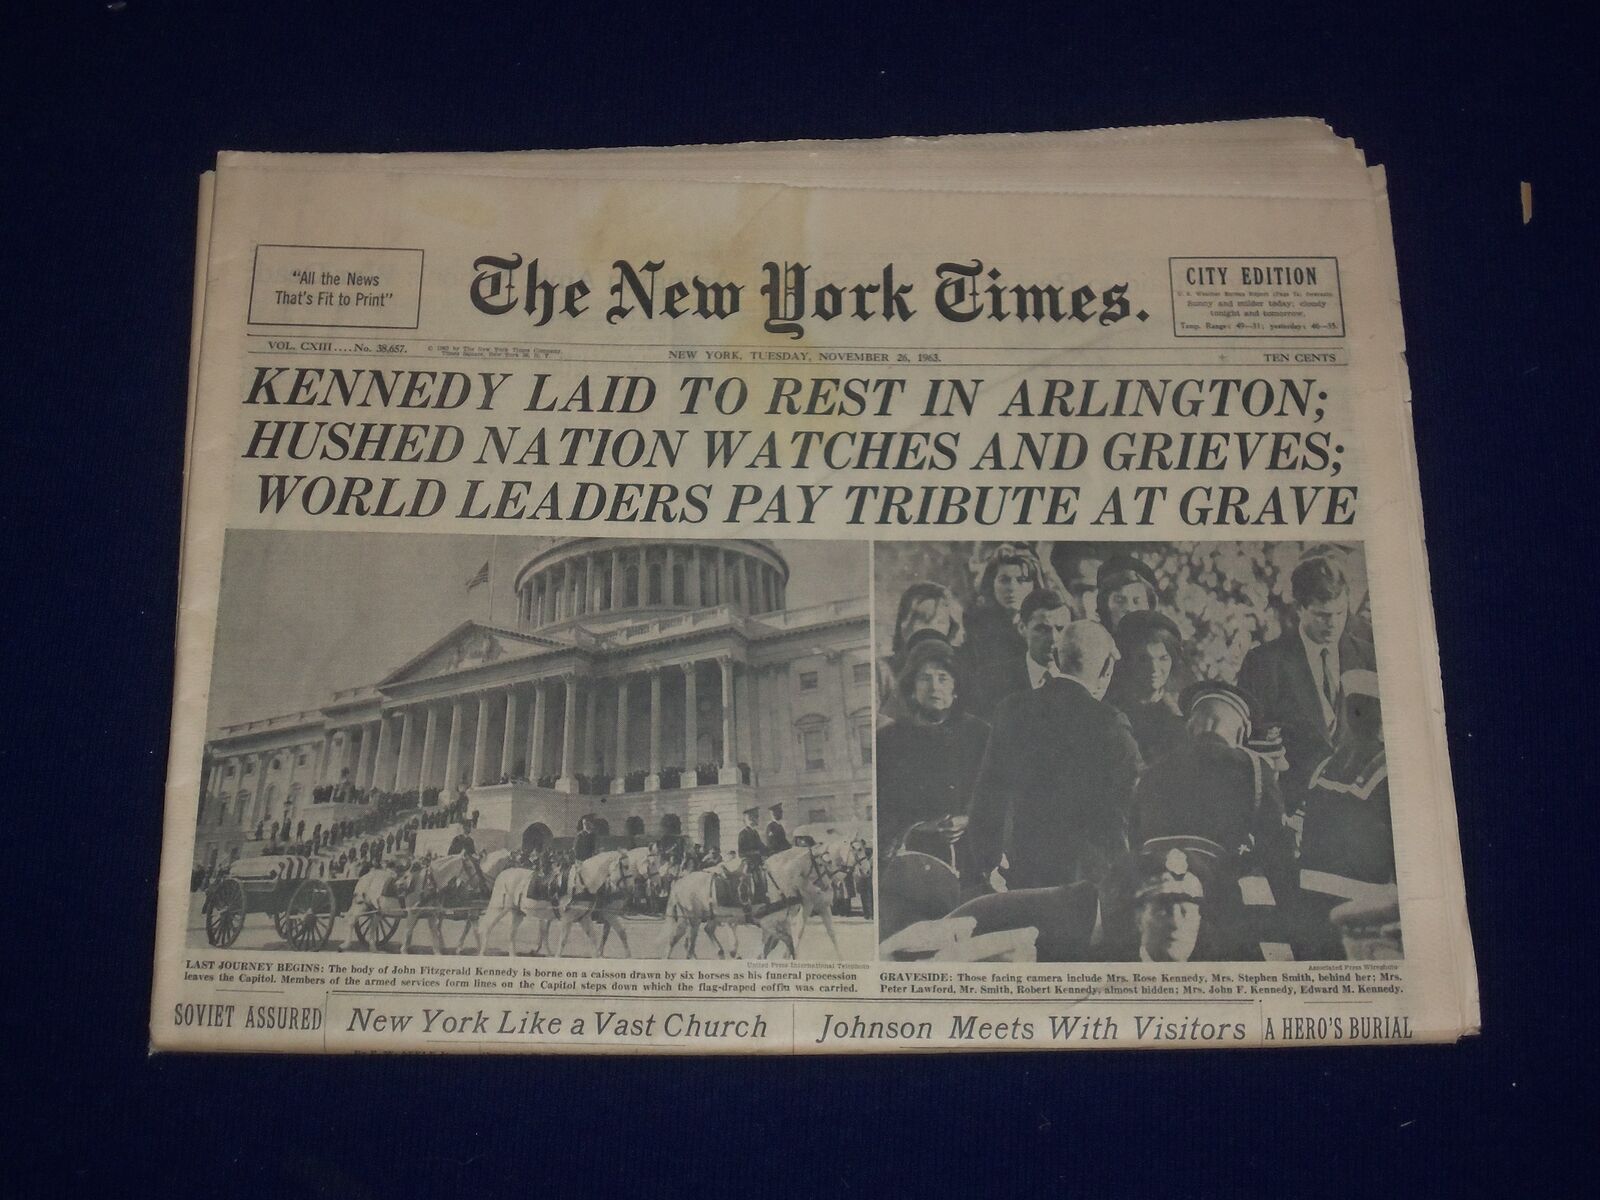 1963 NOVEMBER 26 THE NEW YORK TIMES - KENNEDY LAID TO REST IN ARLINGTON- NP 2999